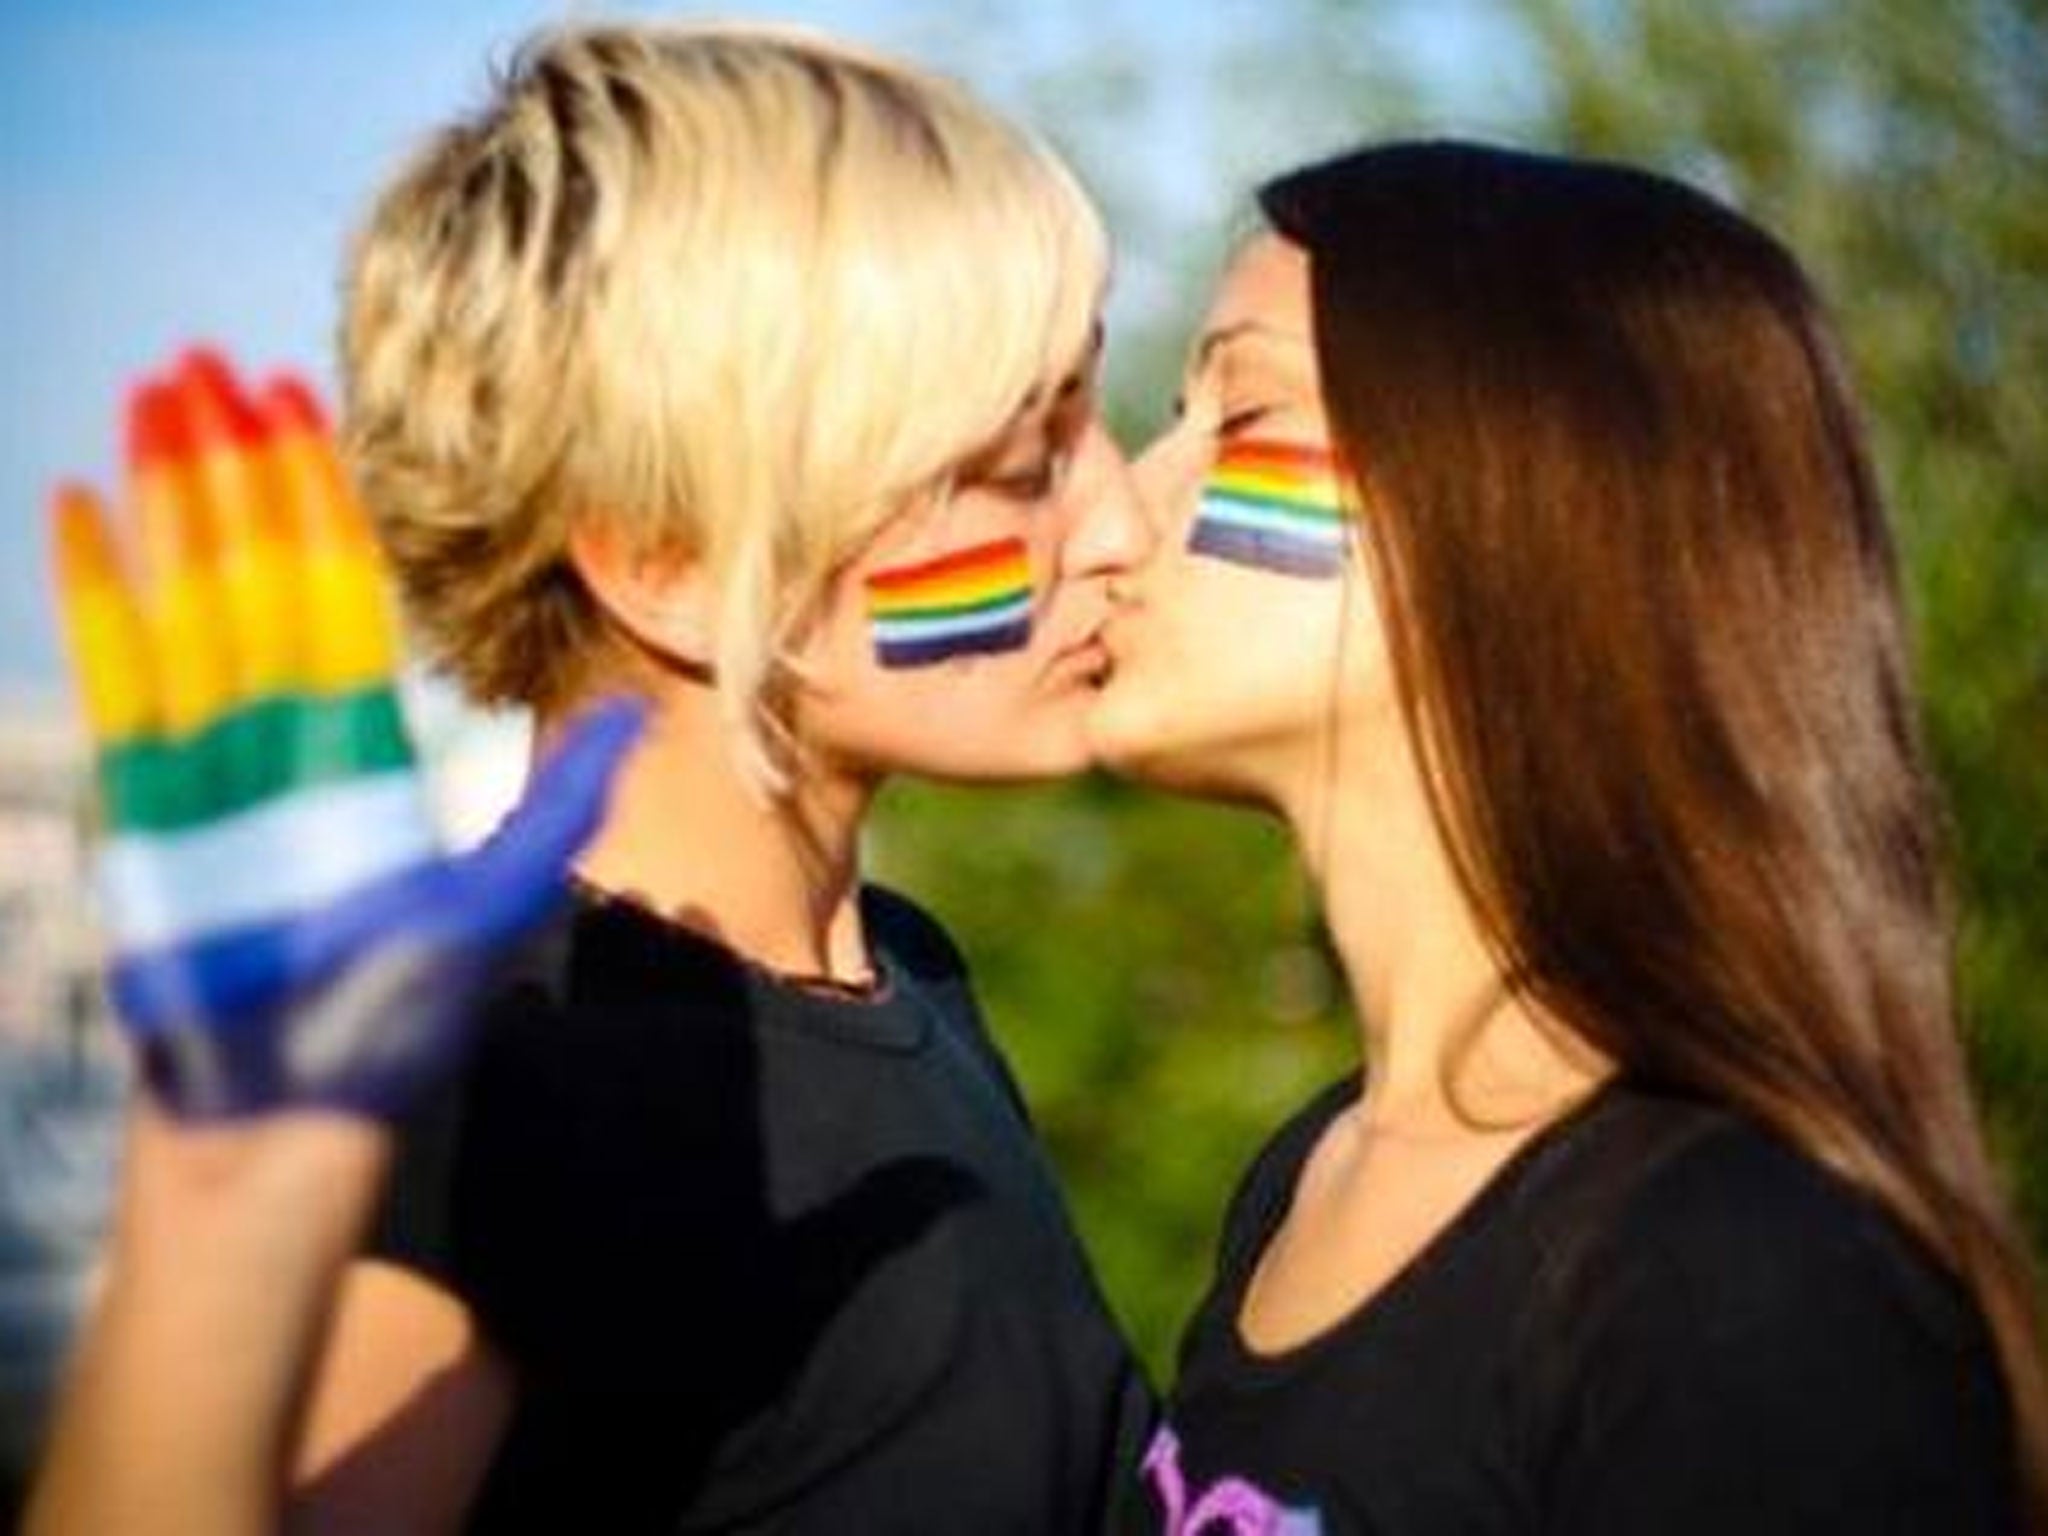 Facebook Suspends Italian Womans Account After She Posts Image Of Two Women Kissing In Support